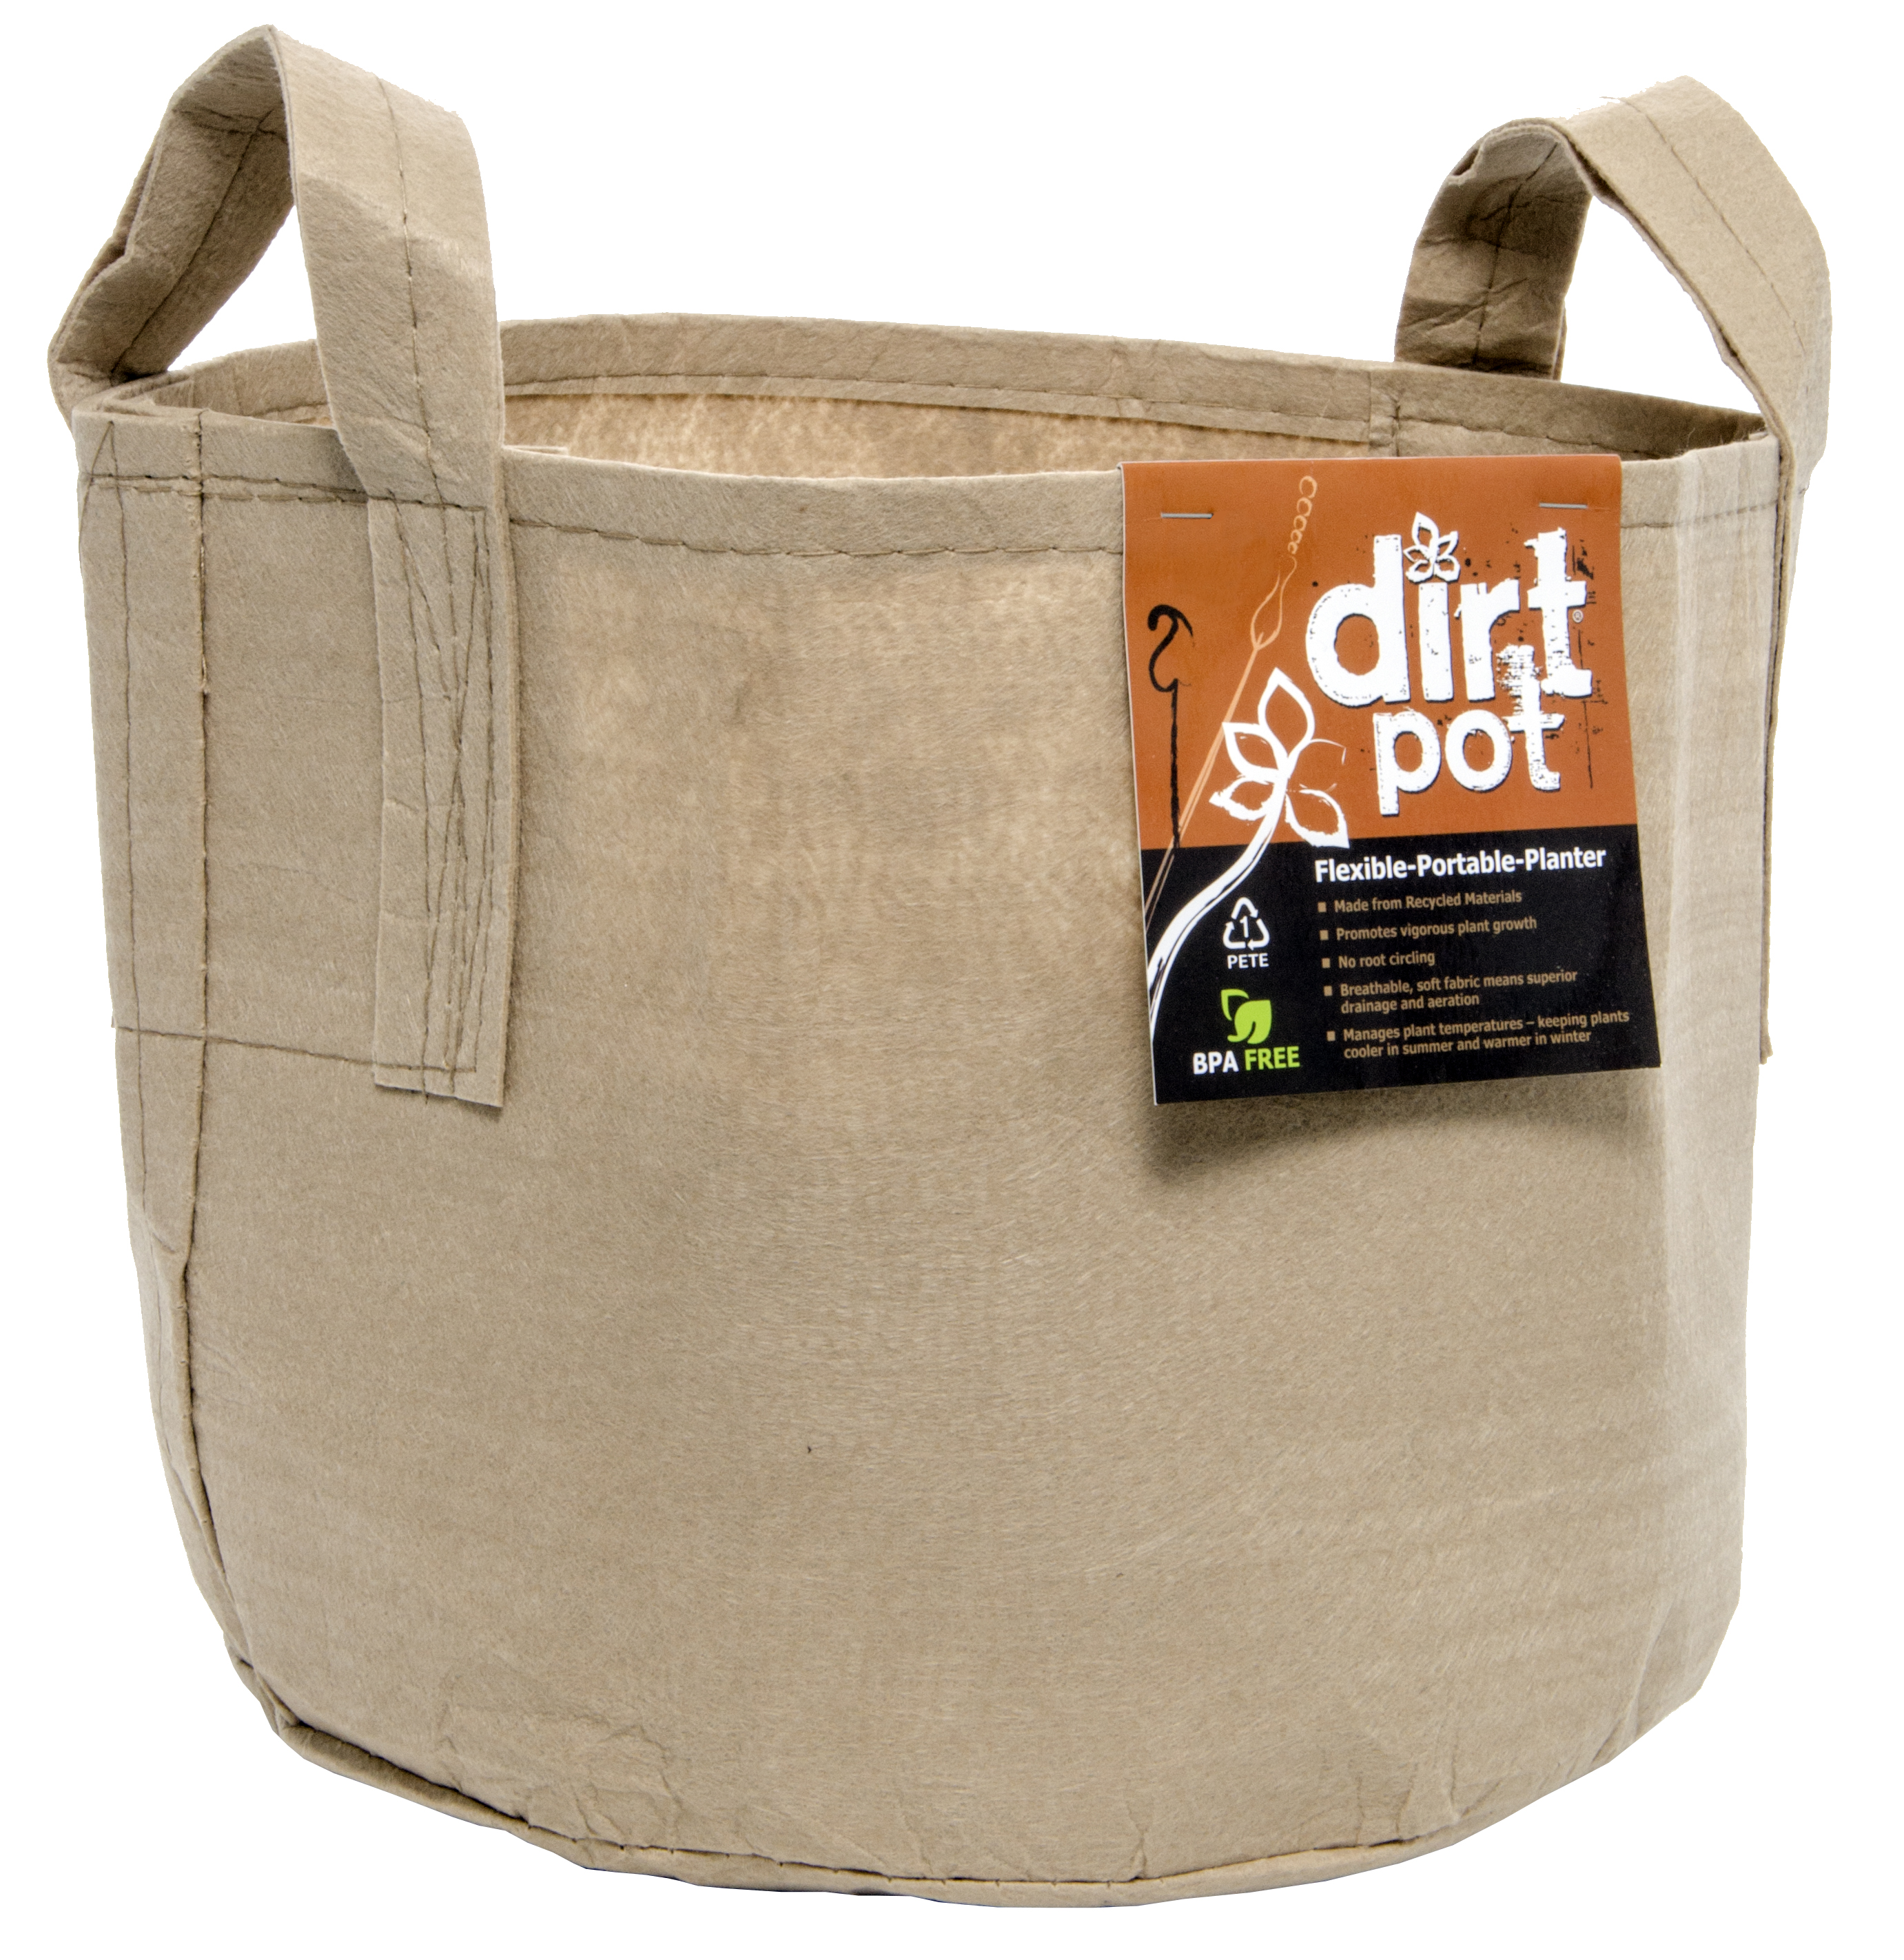 Picture for Dirt Pot Flexible Portable Planter, Tan, 7 gal, with handles